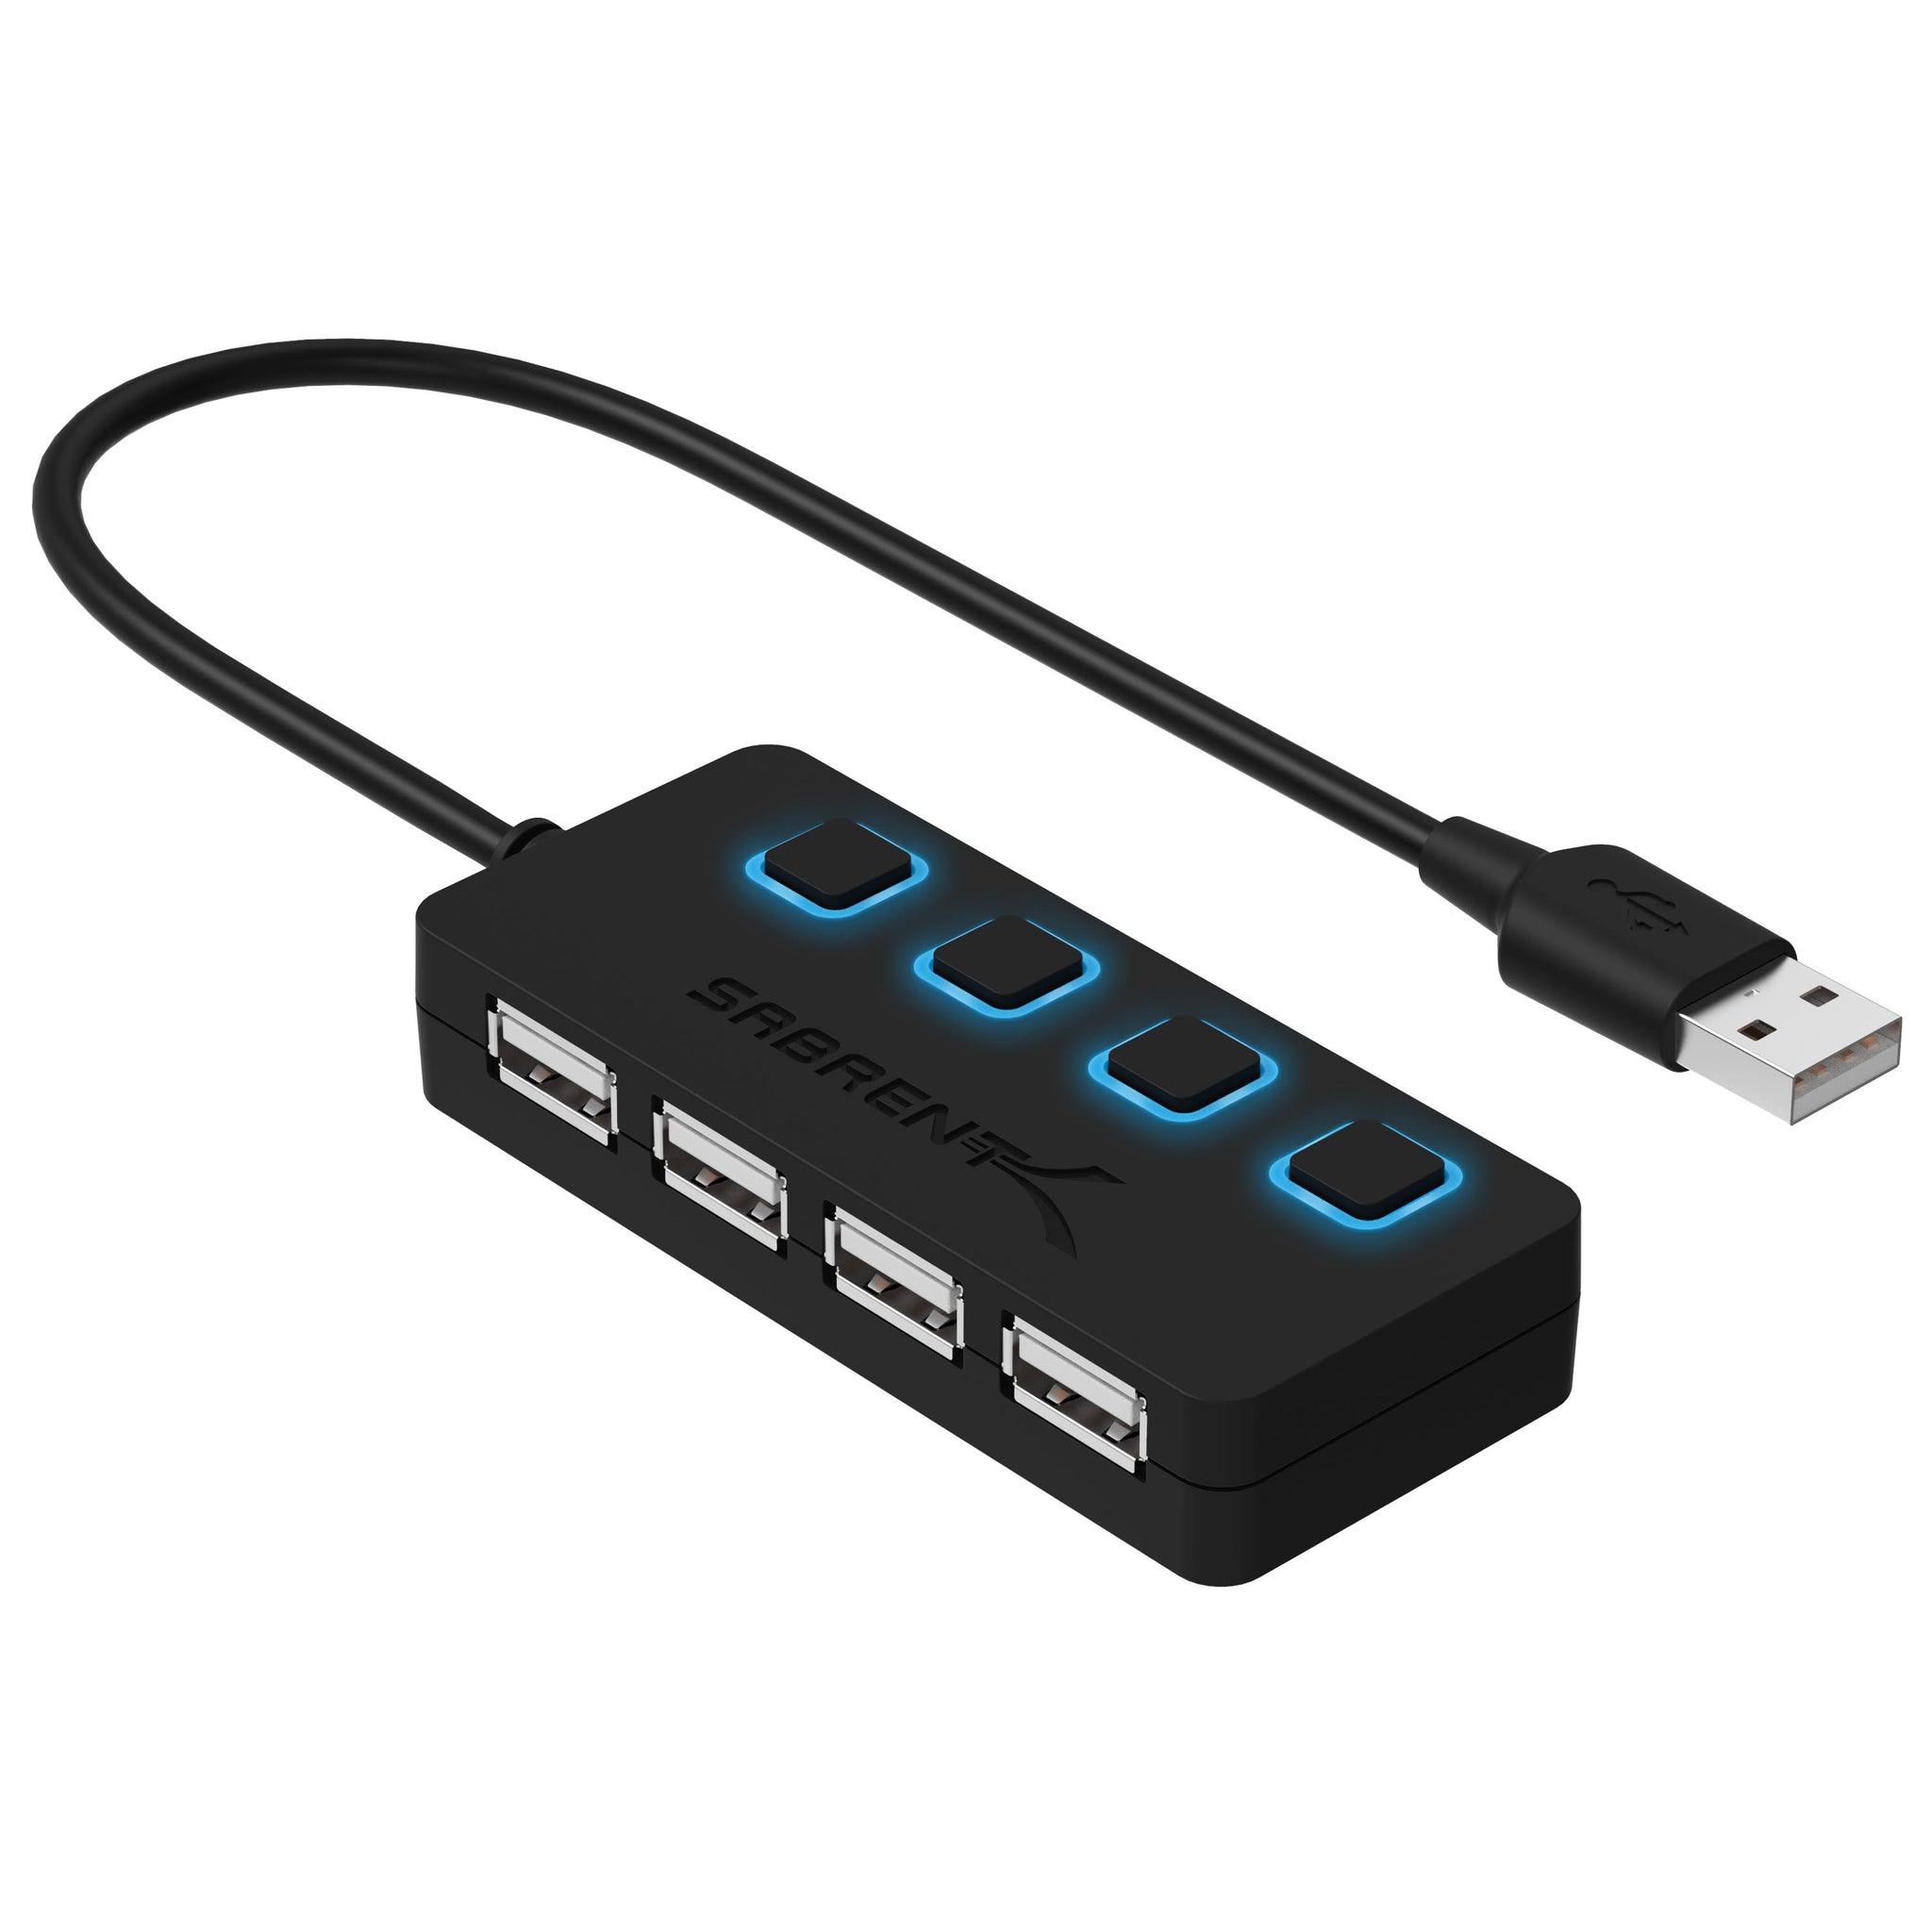 4-Port Portable USB 2.0 Hub with Built-in Cable